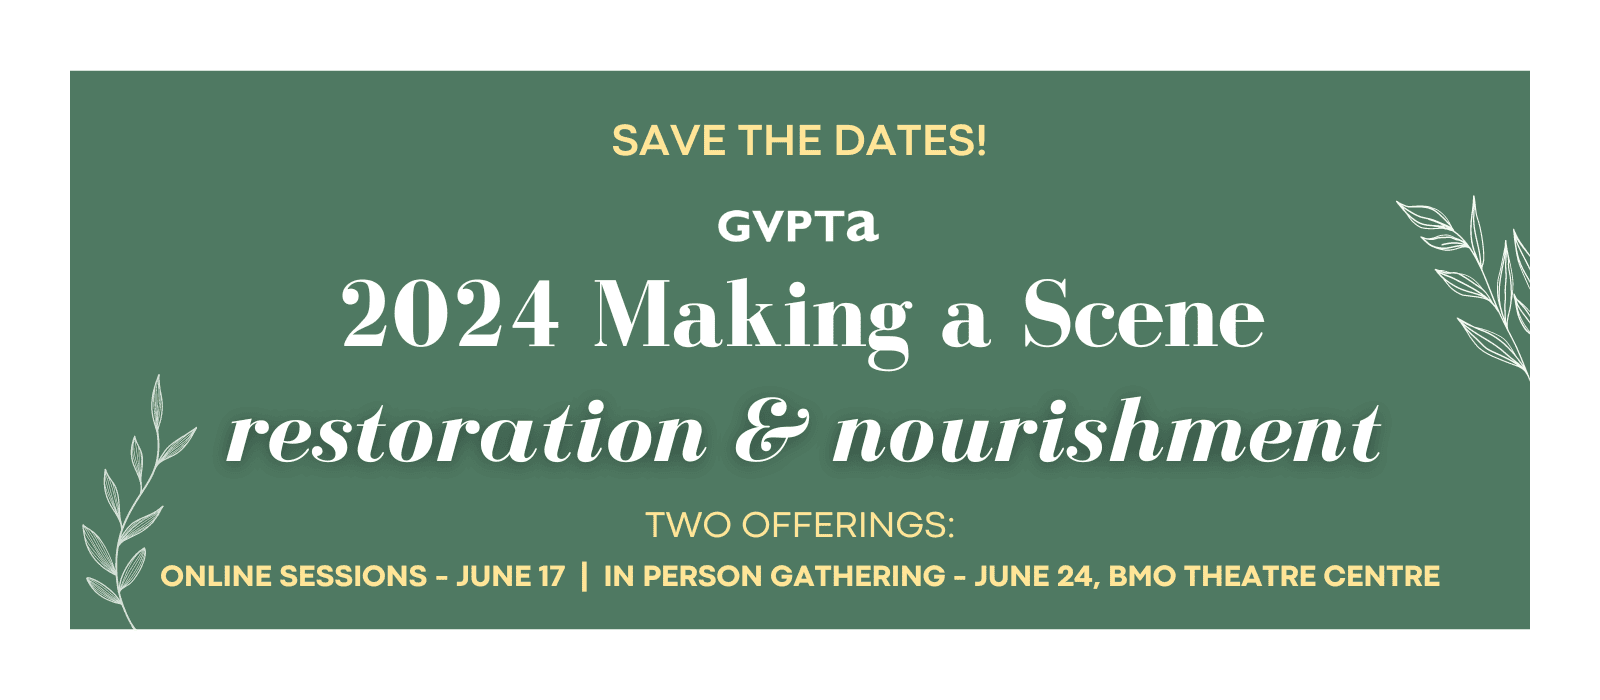 Save the dates! GVPTA's 2024 Making a Scene: restoration & nourishment. Two offerings: online sessions - June 17 | In person gathering \ June 24, BMO Theatre Centre